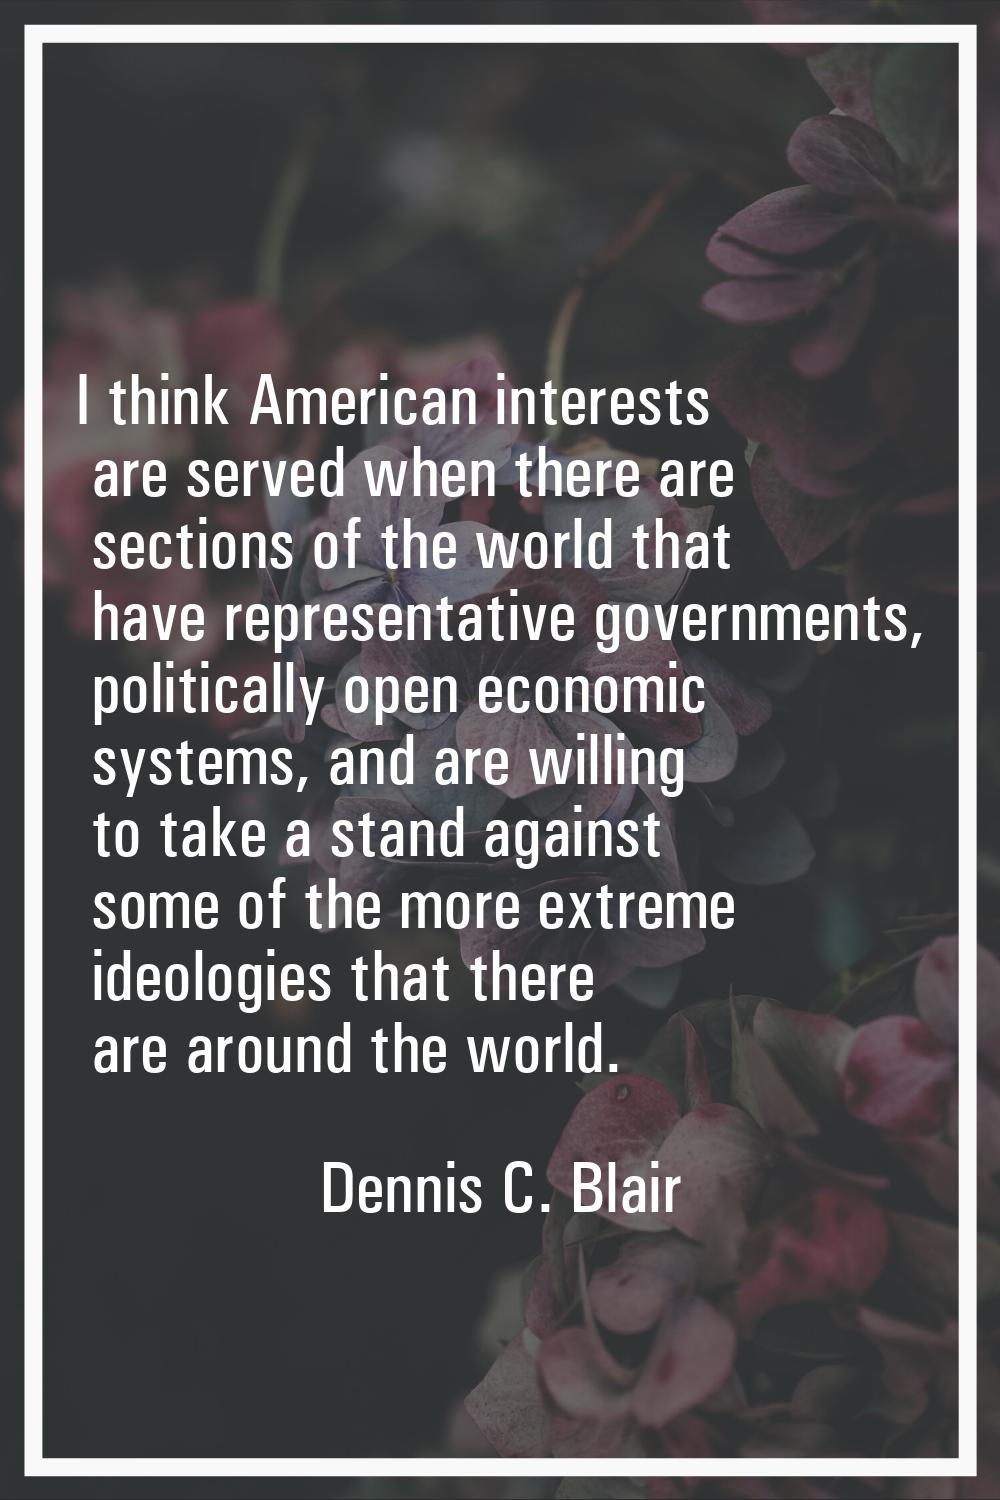 I think American interests are served when there are sections of the world that have representative